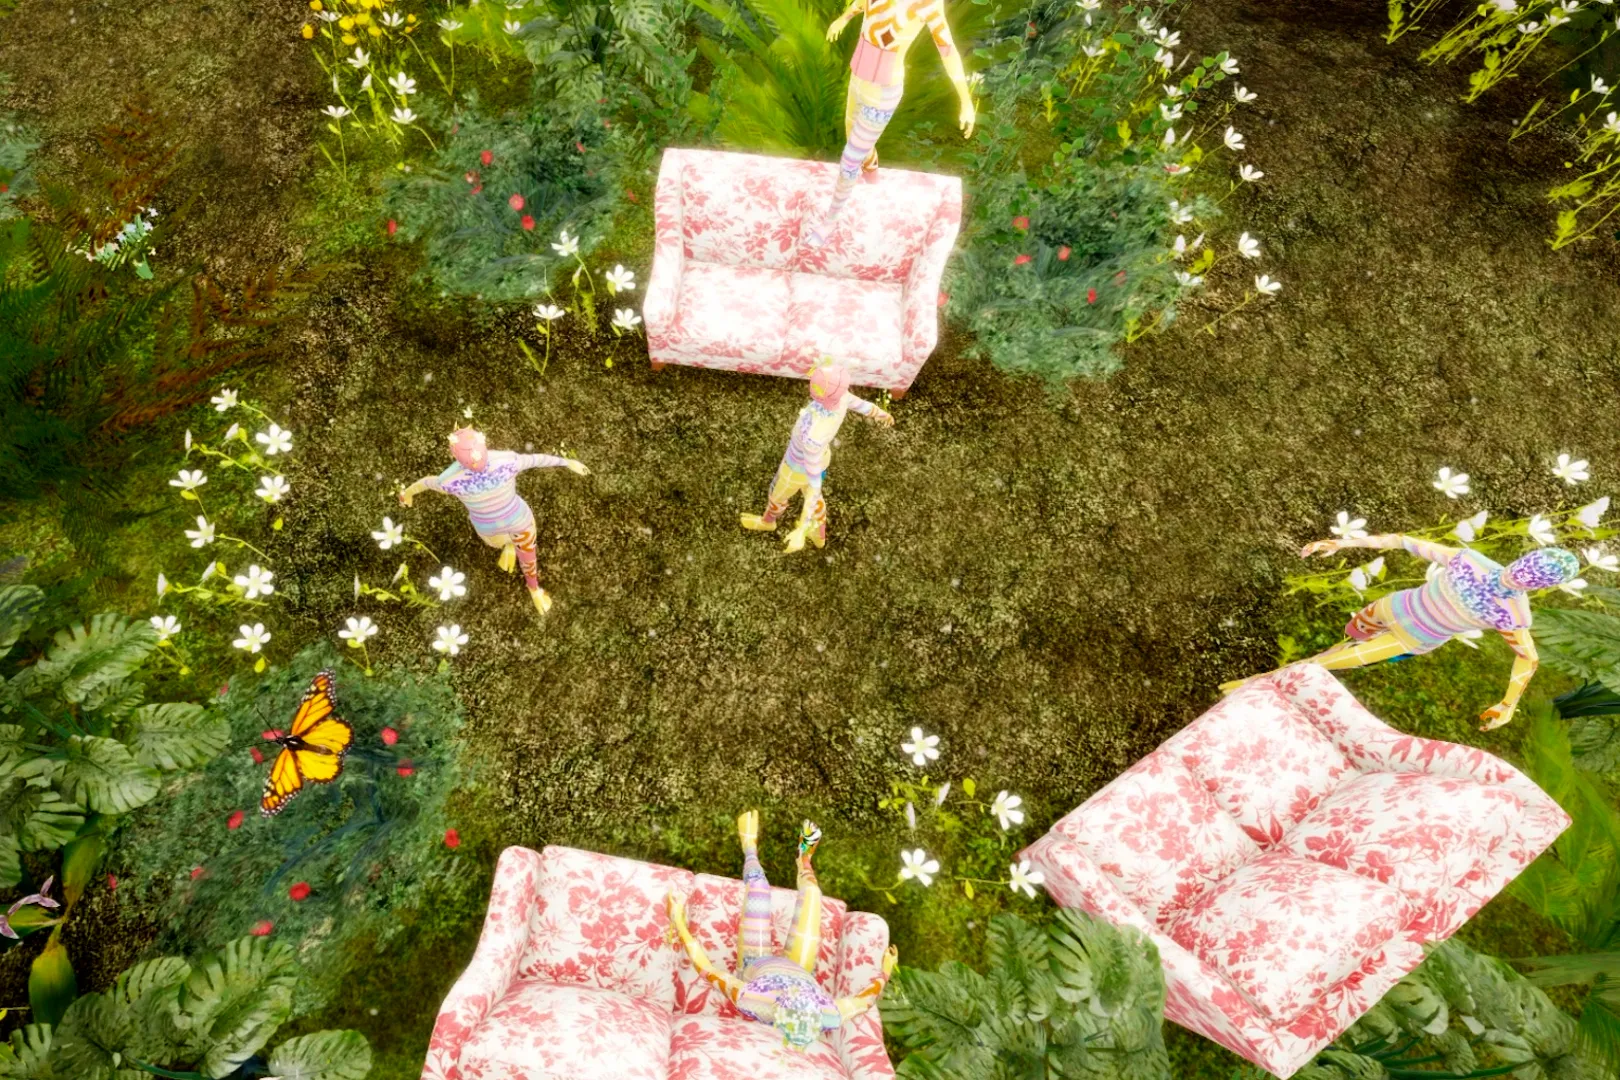 The Gucci Garden in the Roblox metaverse game to show how big the Meta Fashion is becoming